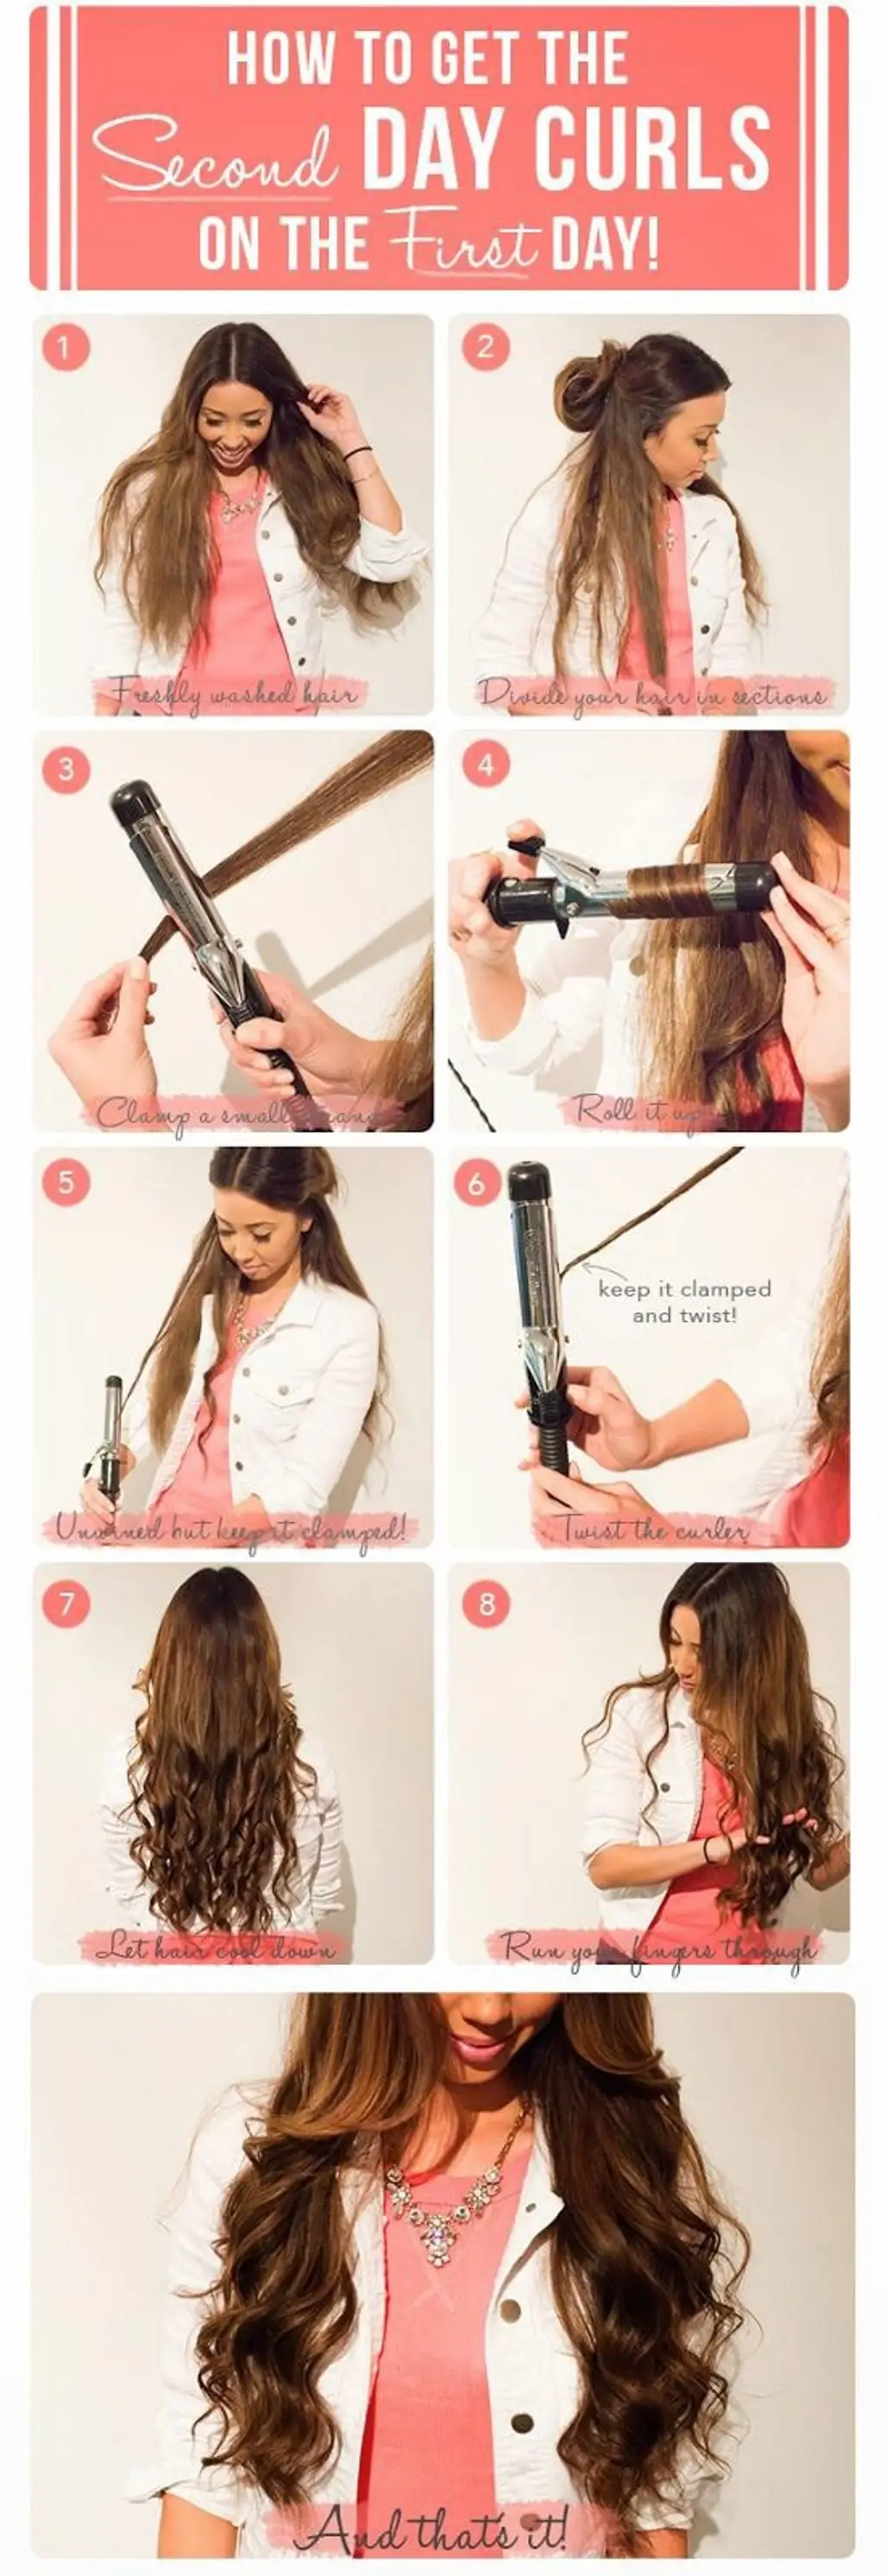 How to Get Second Day Curls on the First Day